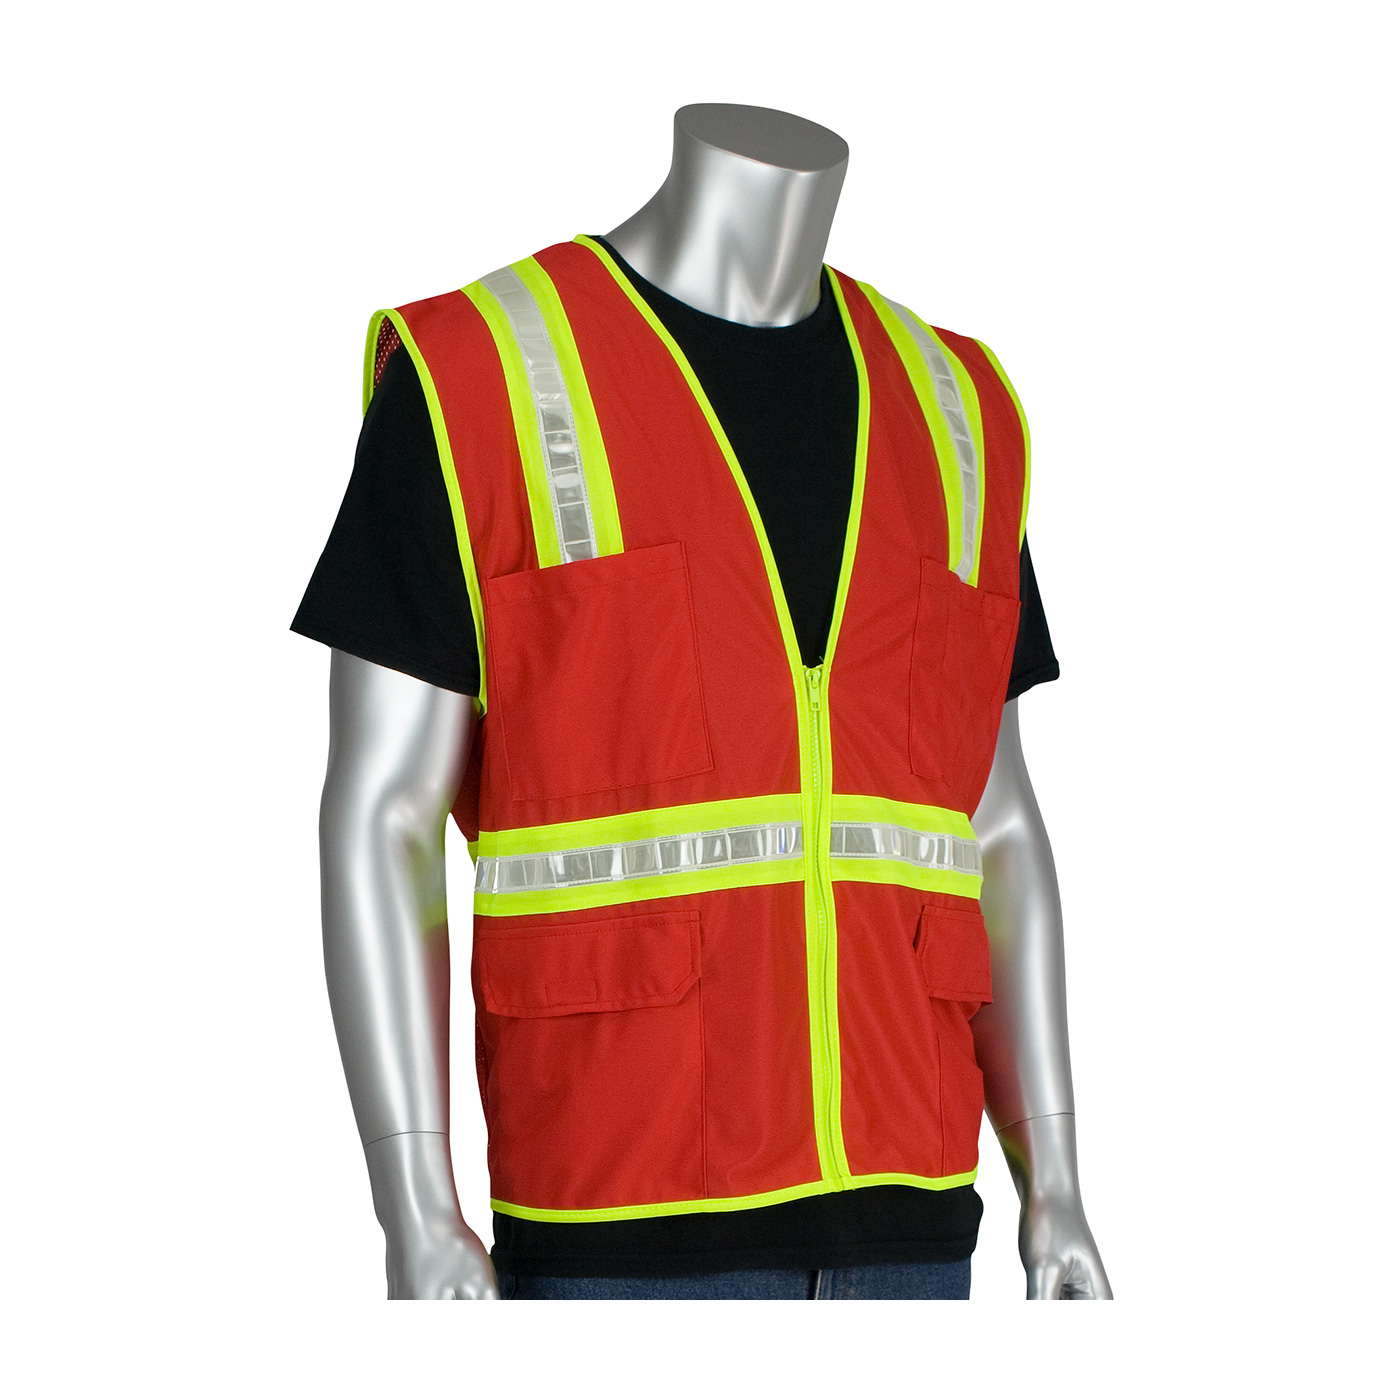 PIP 300-1000-RD/L Non-ANSI Surveyor's Style Safety Vest with a Solid Front, Mesh Back and Prismatic Tape - Large PID-300 1000 RD LG